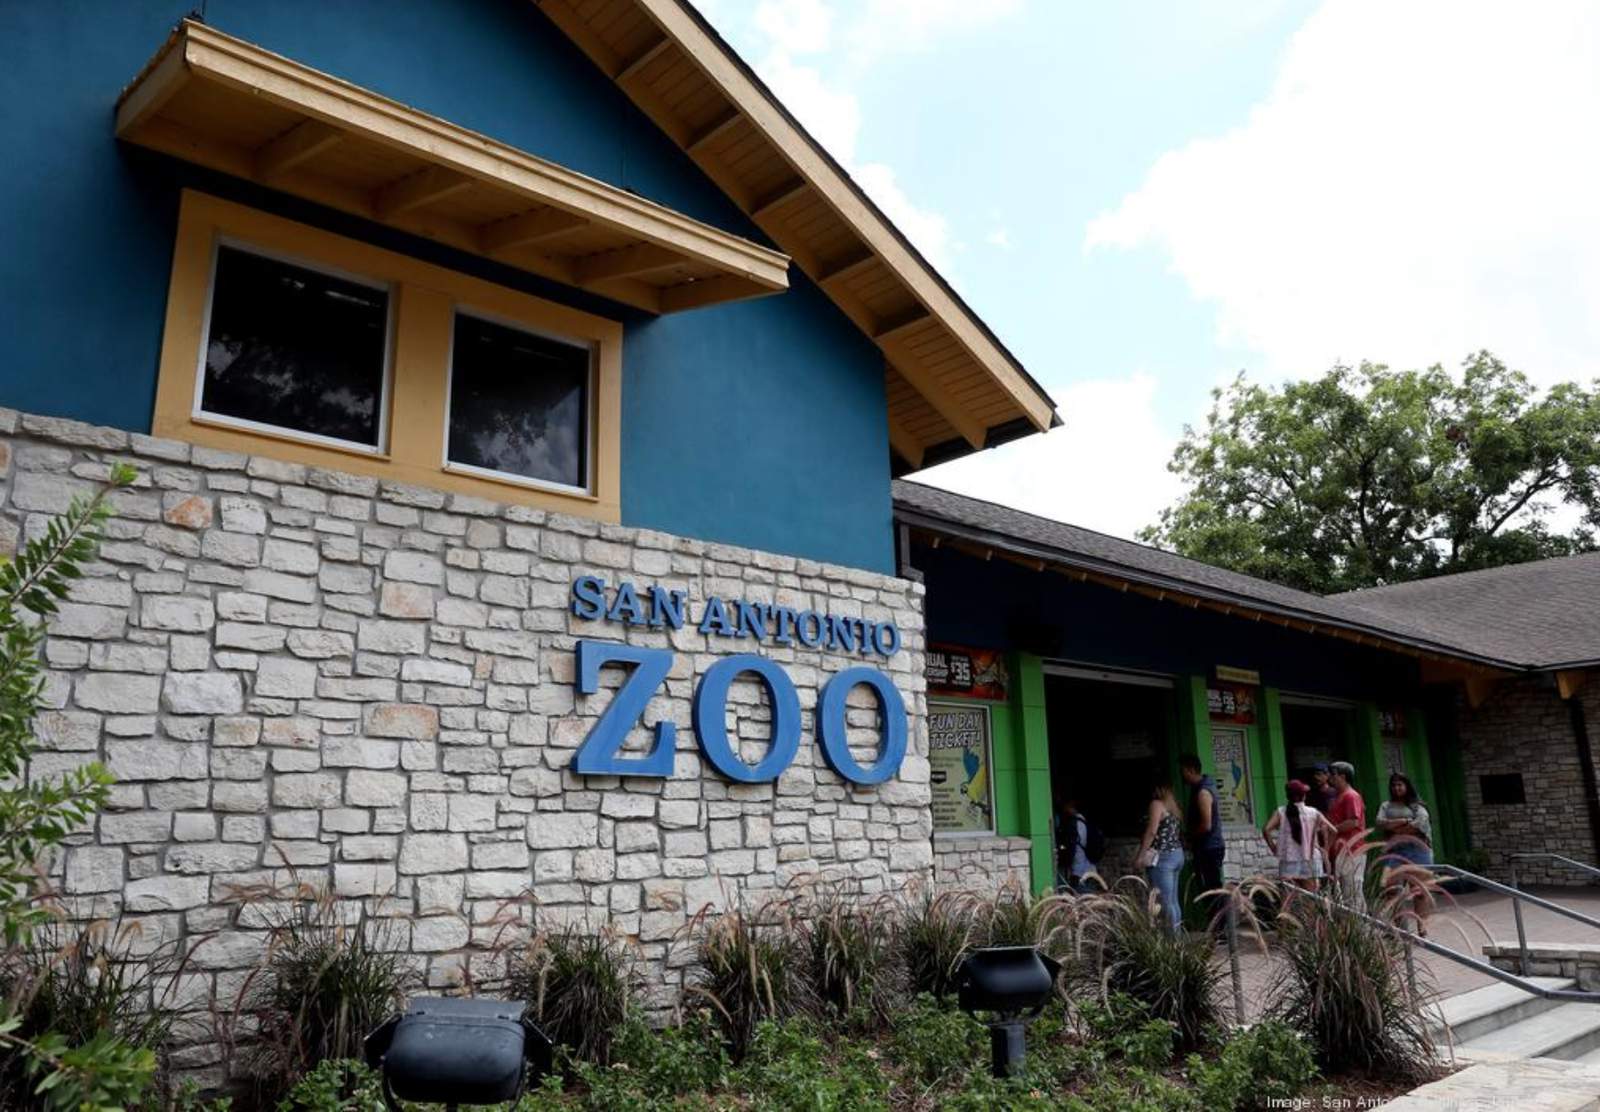 Admission to San Antonio Zoo is $8 on Friday for locals